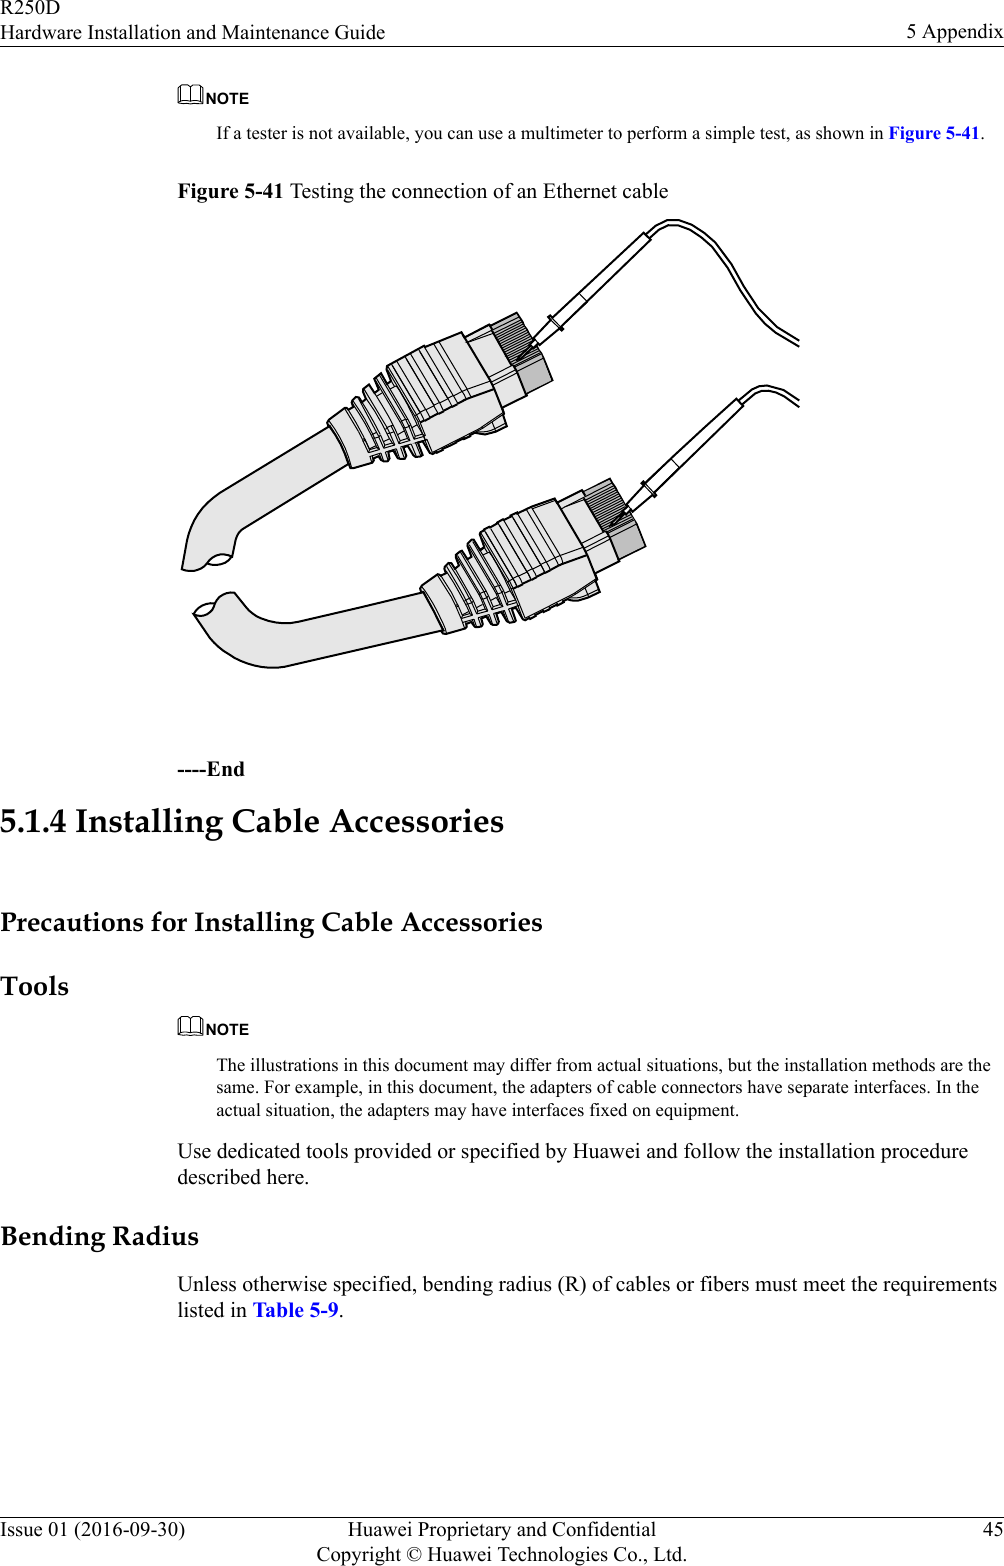 NOTEIf a tester is not available, you can use a multimeter to perform a simple test, as shown in Figure 5-41.Figure 5-41 Testing the connection of an Ethernet cable ----End5.1.4 Installing Cable AccessoriesPrecautions for Installing Cable AccessoriesToolsNOTEThe illustrations in this document may differ from actual situations, but the installation methods are thesame. For example, in this document, the adapters of cable connectors have separate interfaces. In theactual situation, the adapters may have interfaces fixed on equipment.Use dedicated tools provided or specified by Huawei and follow the installation proceduredescribed here.Bending RadiusUnless otherwise specified, bending radius (R) of cables or fibers must meet the requirementslisted in Table 5-9.R250DHardware Installation and Maintenance Guide 5 AppendixIssue 01 (2016-09-30) Huawei Proprietary and ConfidentialCopyright © Huawei Technologies Co., Ltd.45